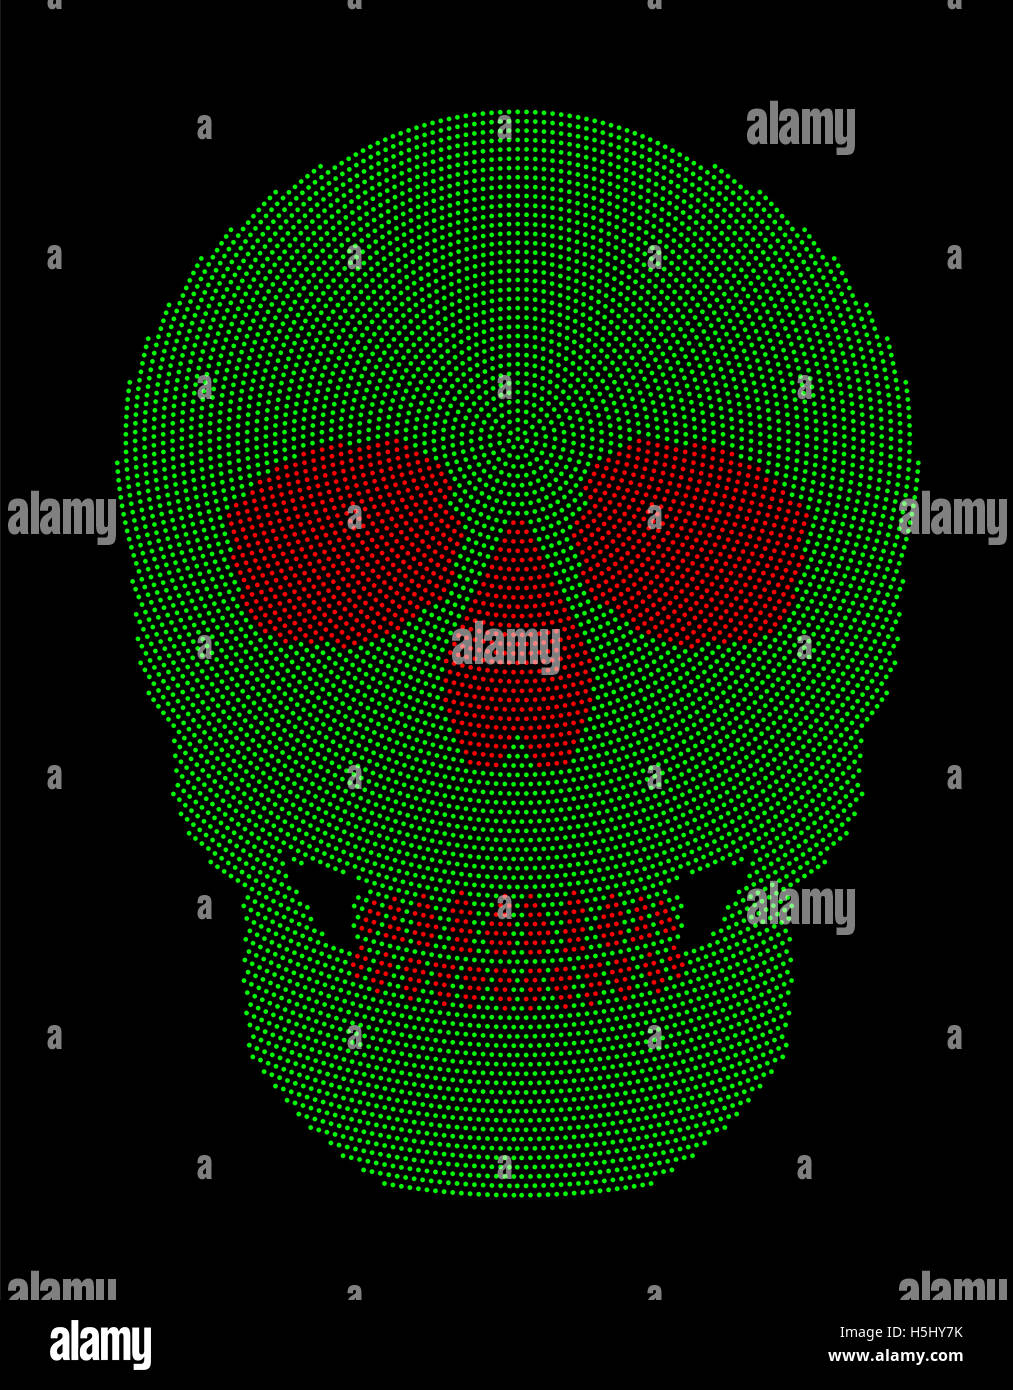 Skull green and red radial dot pattern. Symbol of the bone structure of an head of a skeleton. Formed by dots. Stock Photo